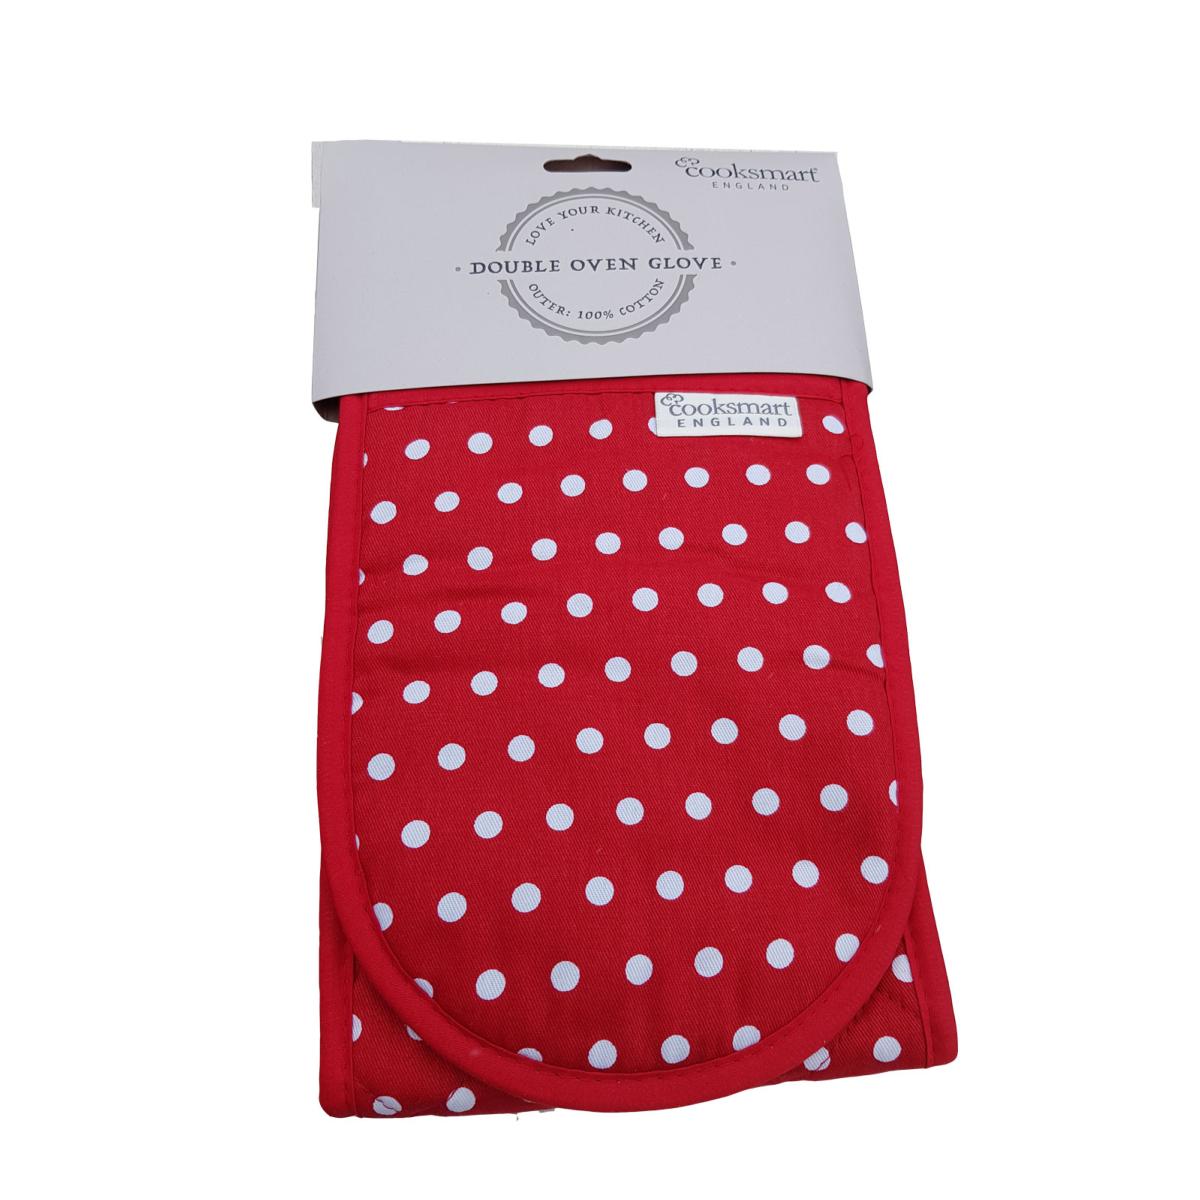 Cooksmart Mals | Festive Red Spotted | Double Oven Gloves